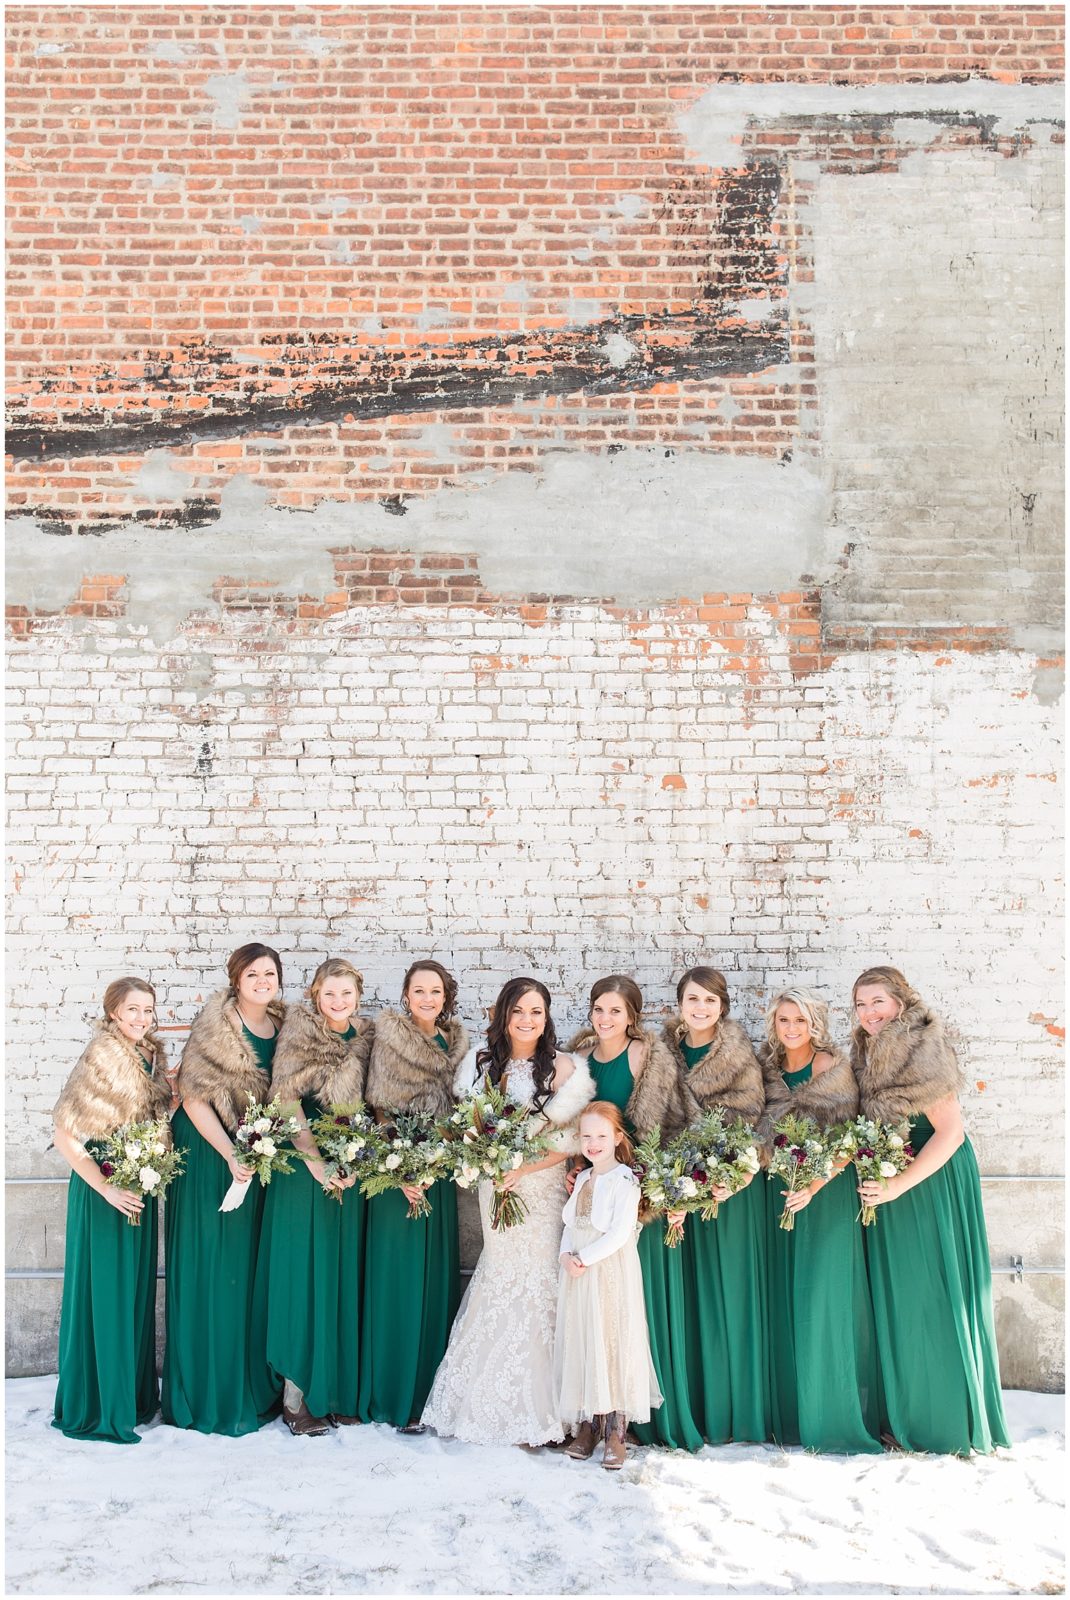 Bridal Party shot by Jessica Brees, photographer and videographer near Sioux City, Iowa